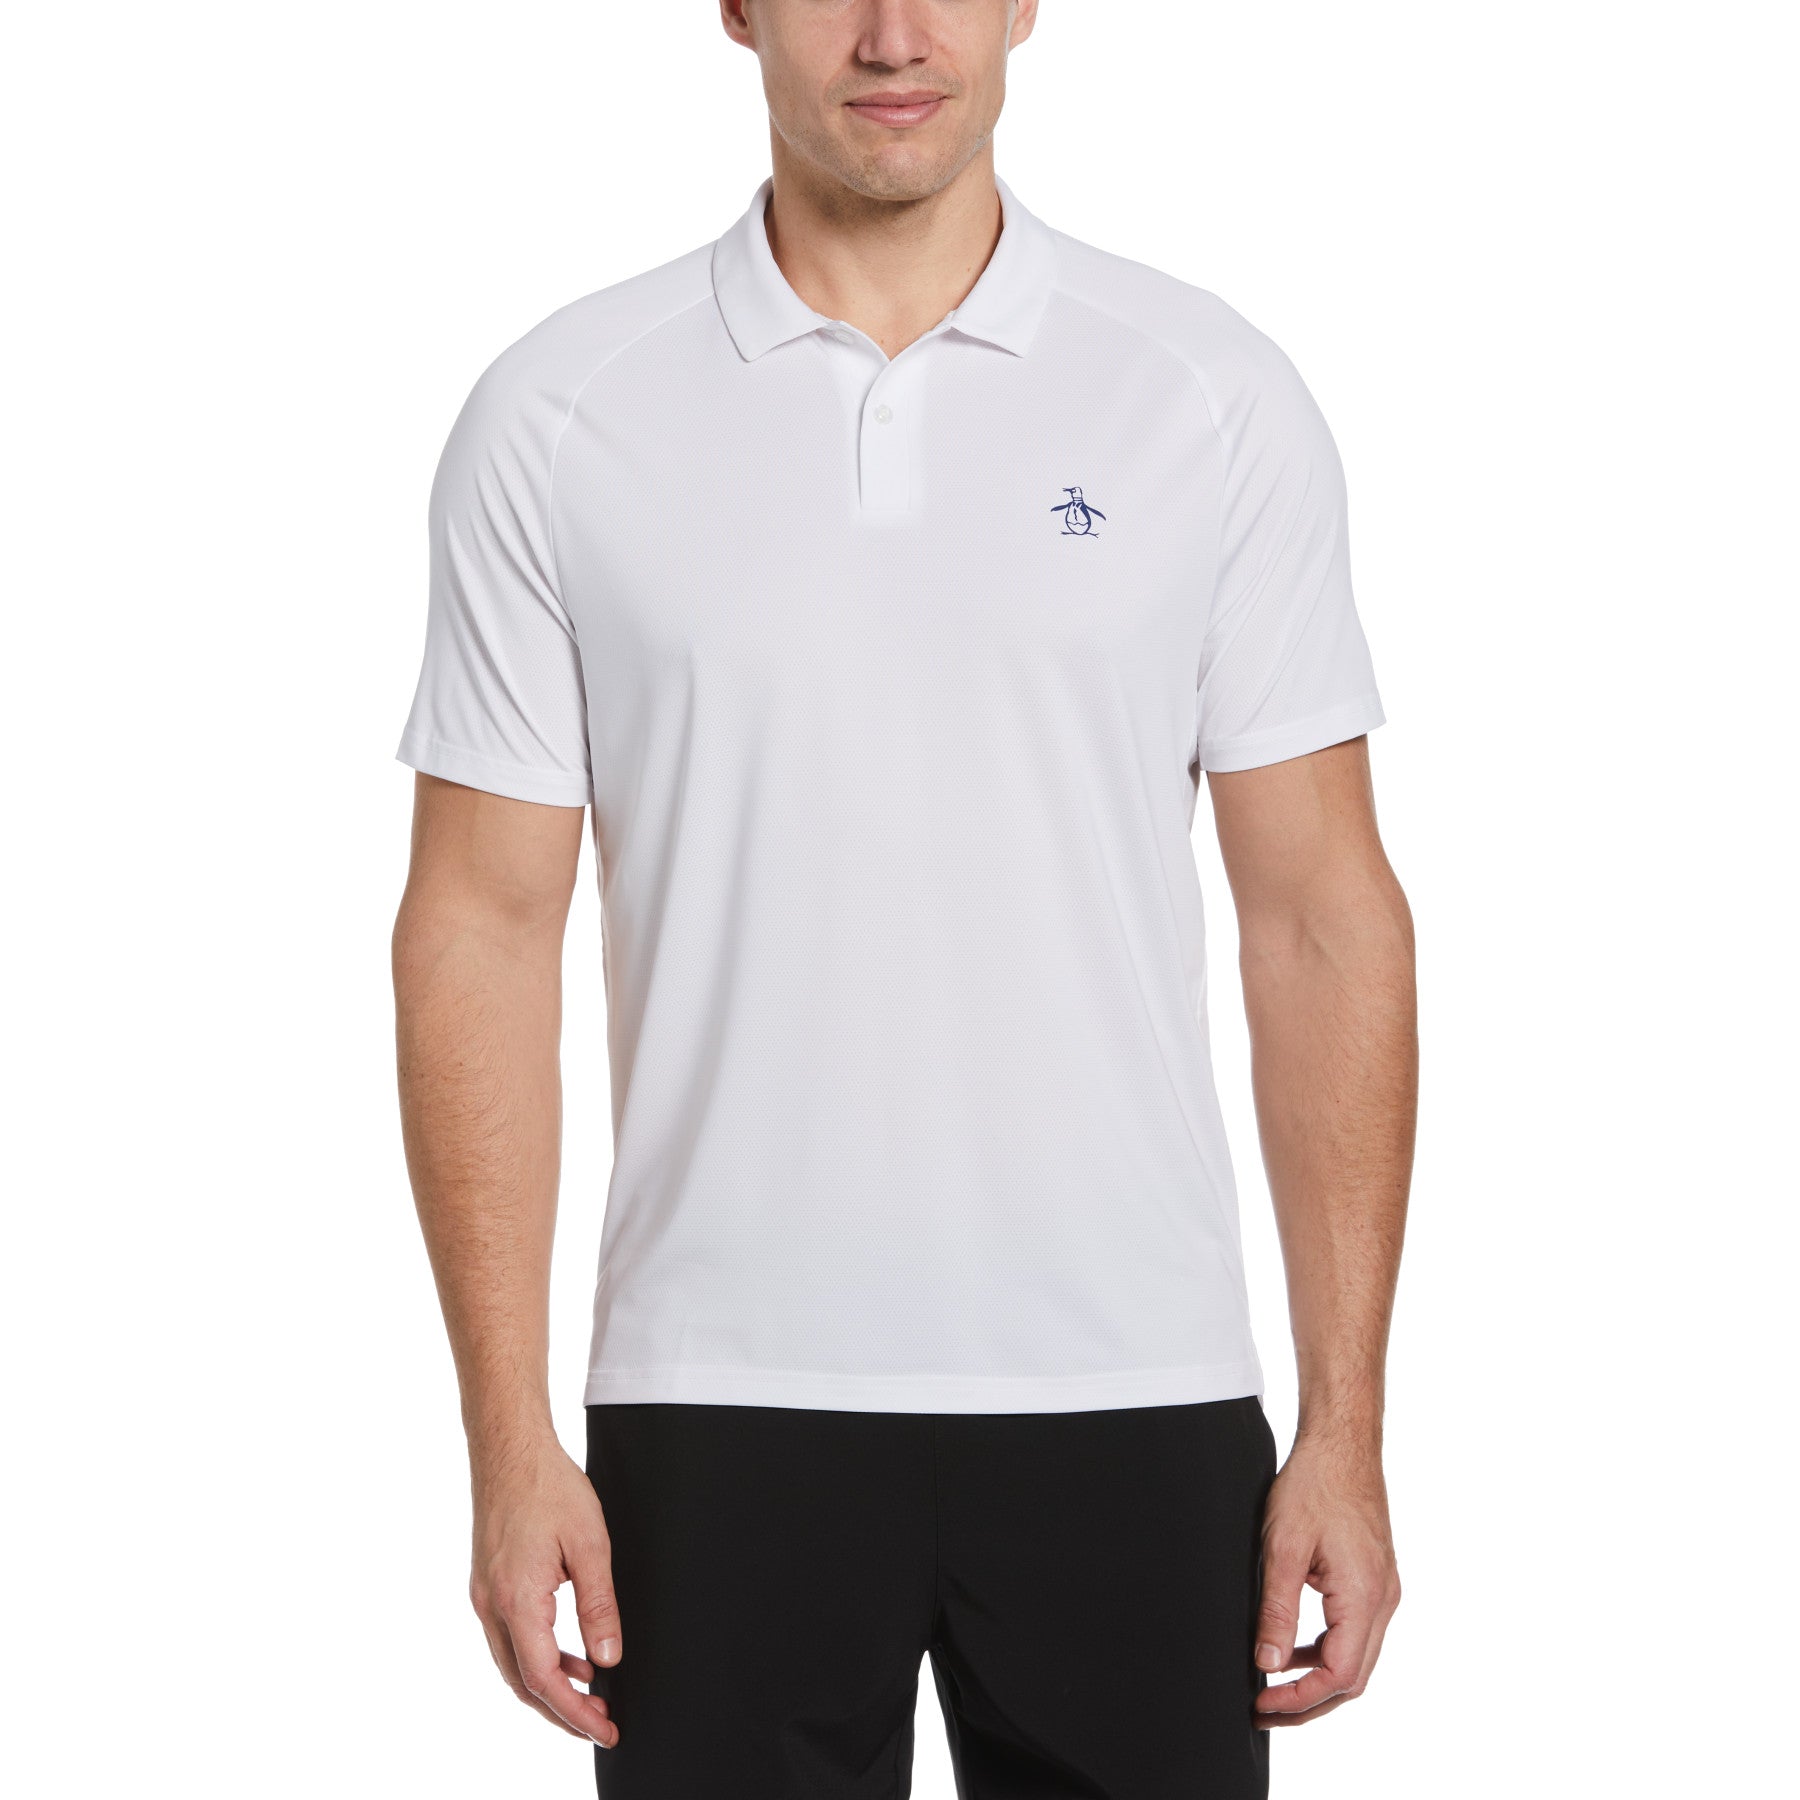 View Legacy Gussett Tennis Polo In Bright White information